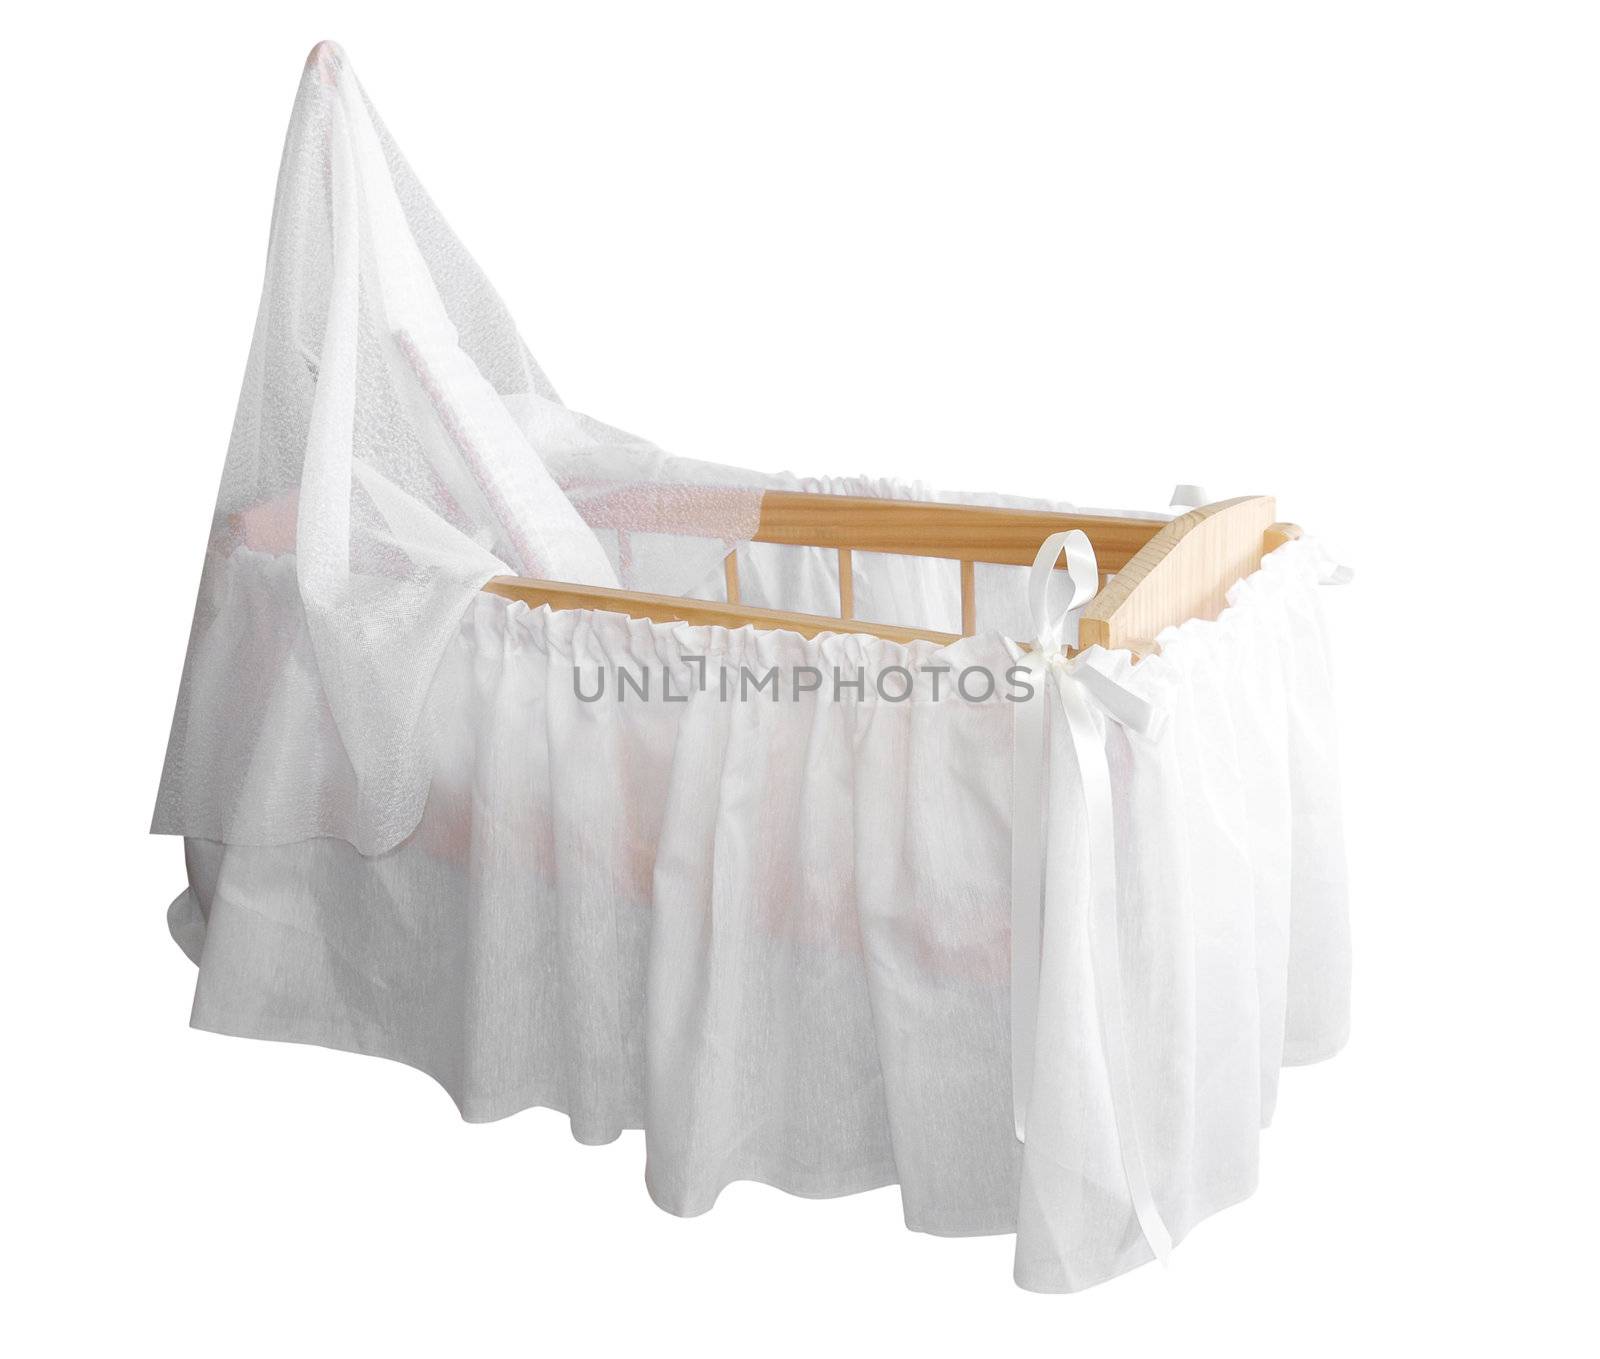 Wooden Bassinet with White Drapes by MargoJH